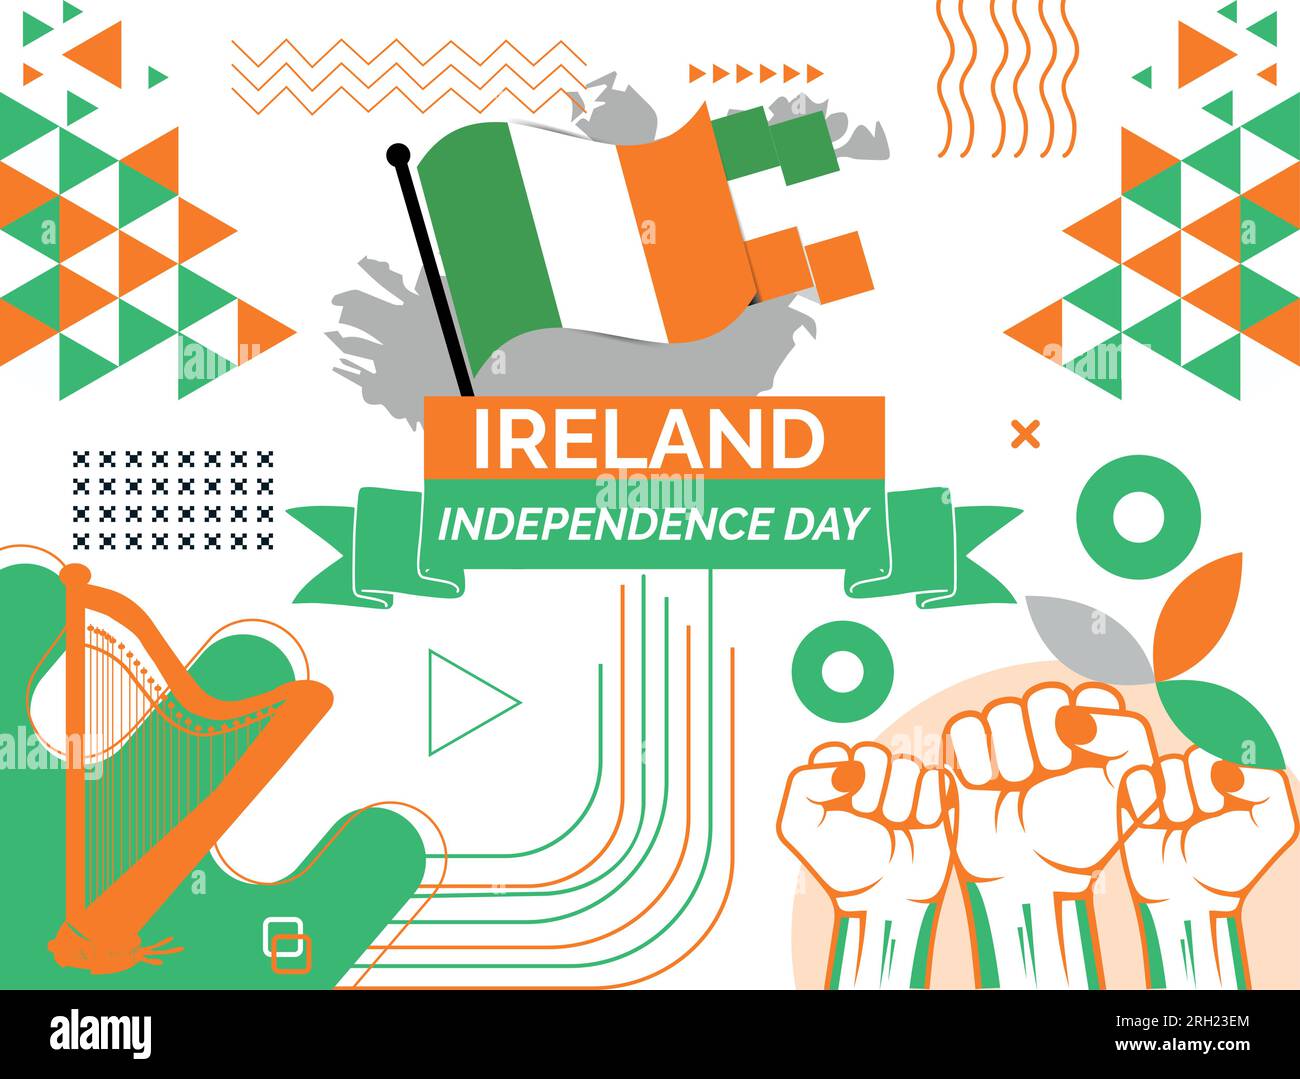 Ireland national day banner design. Ireland flag and map theme with background. Template vector Ireland flag modern design. Abstract geometric retro Stock Vector